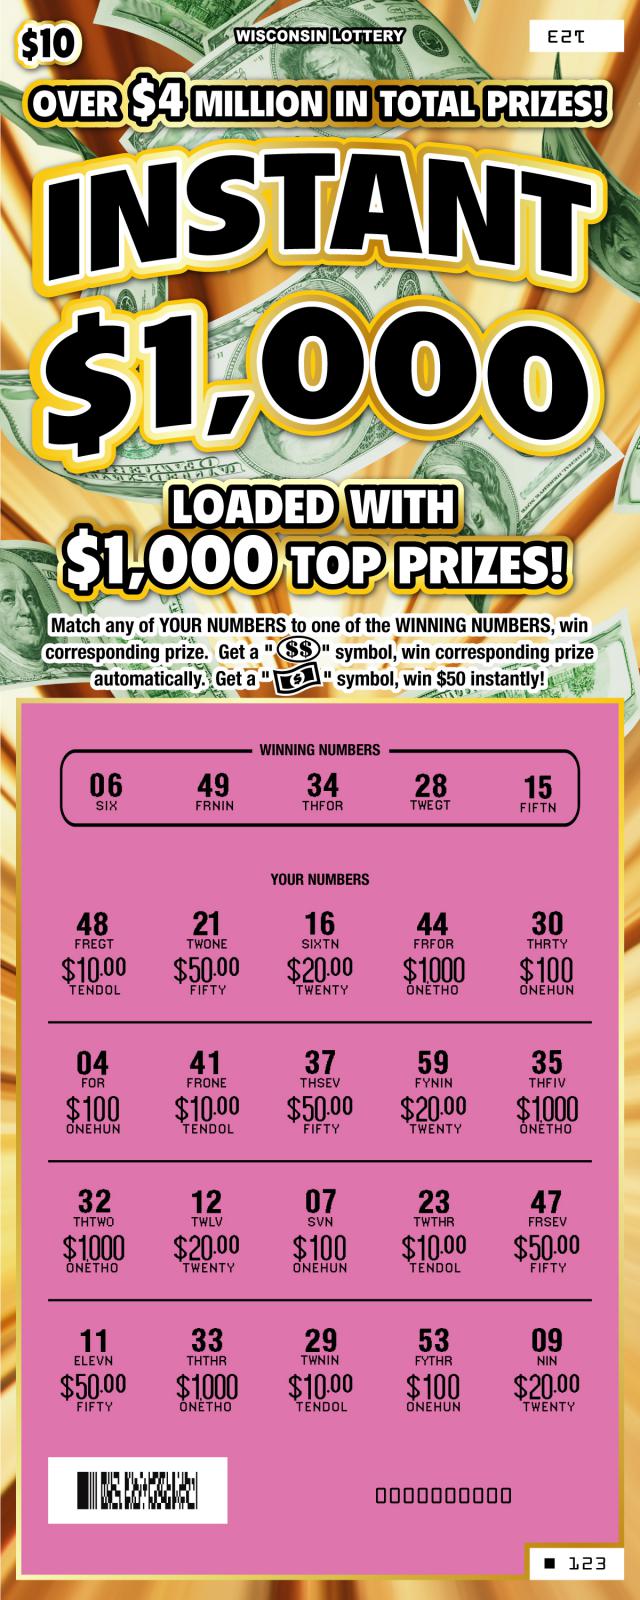 Instant $1,000 instant scratch ticket from Wisconsin Lottery - scratched